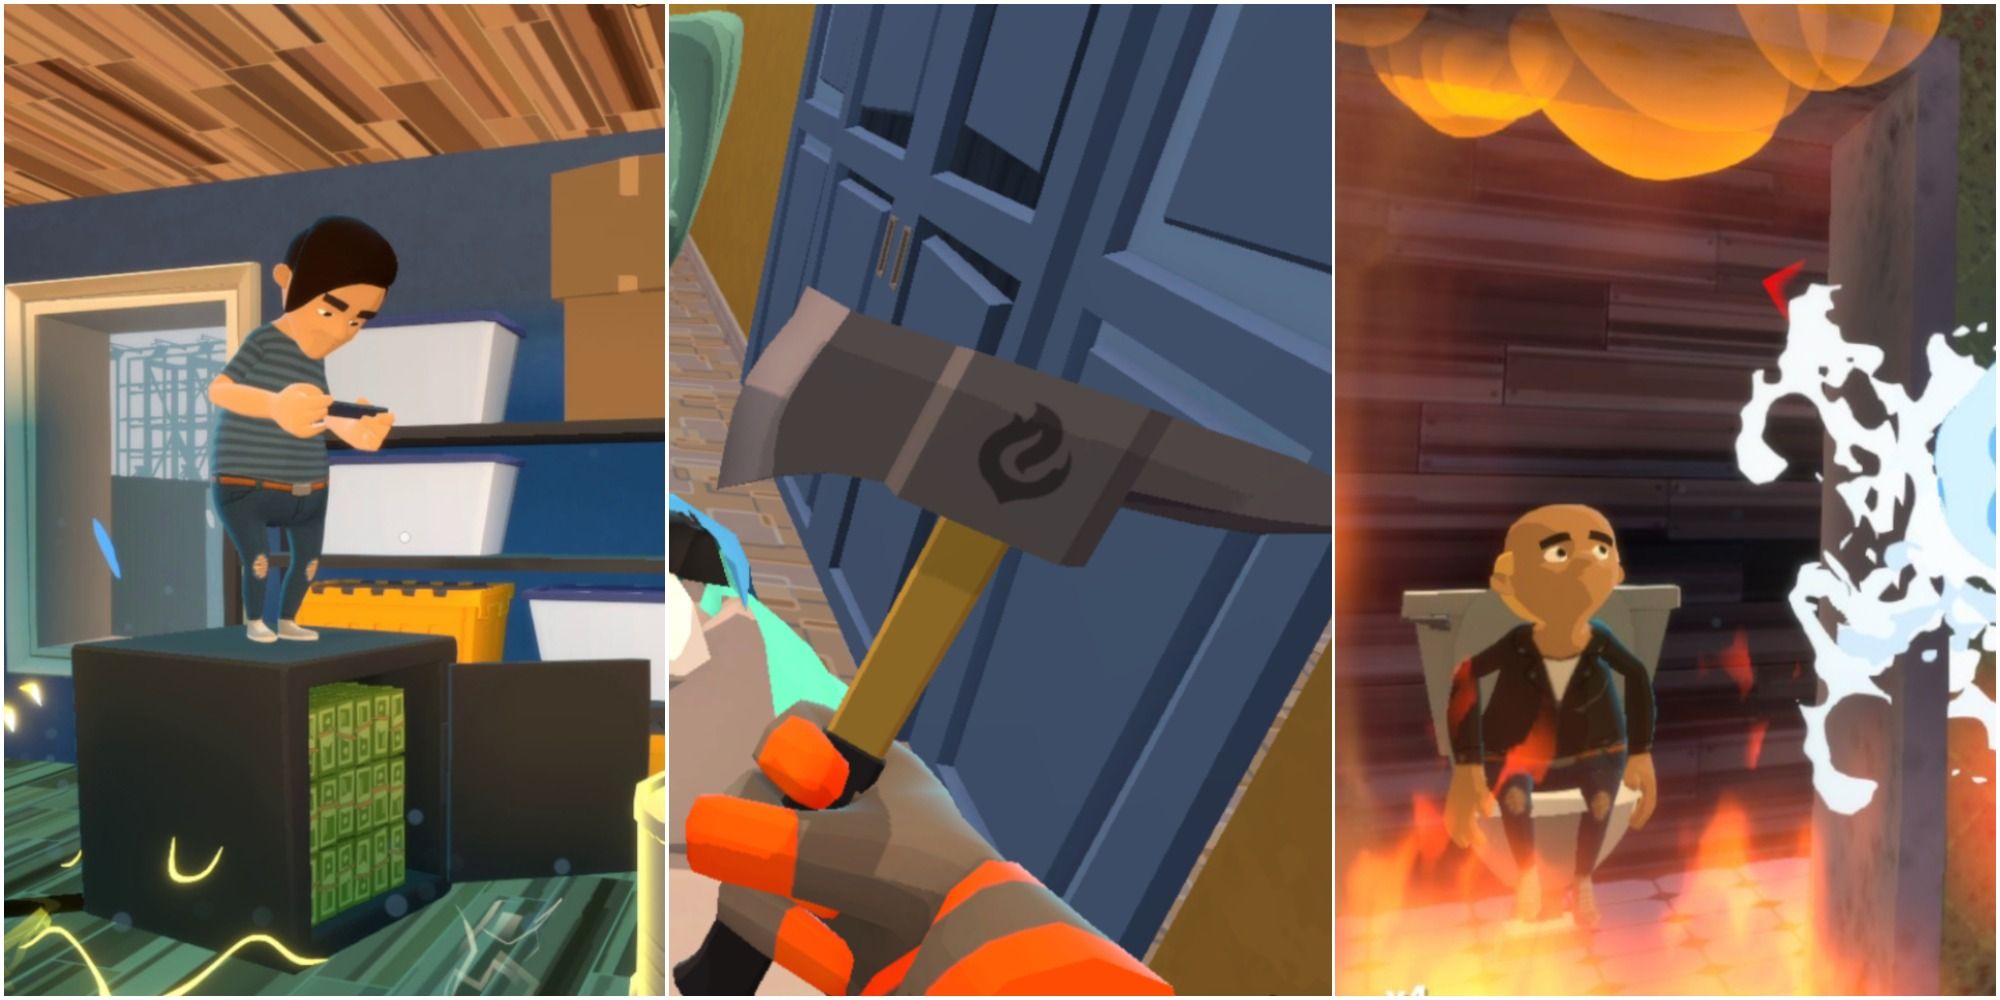 Embr on the left an NPC stood on top of a safe full of money, in the middle a gloved hand wielding an axe and on the right a man sat on a toilet surrounded by fire